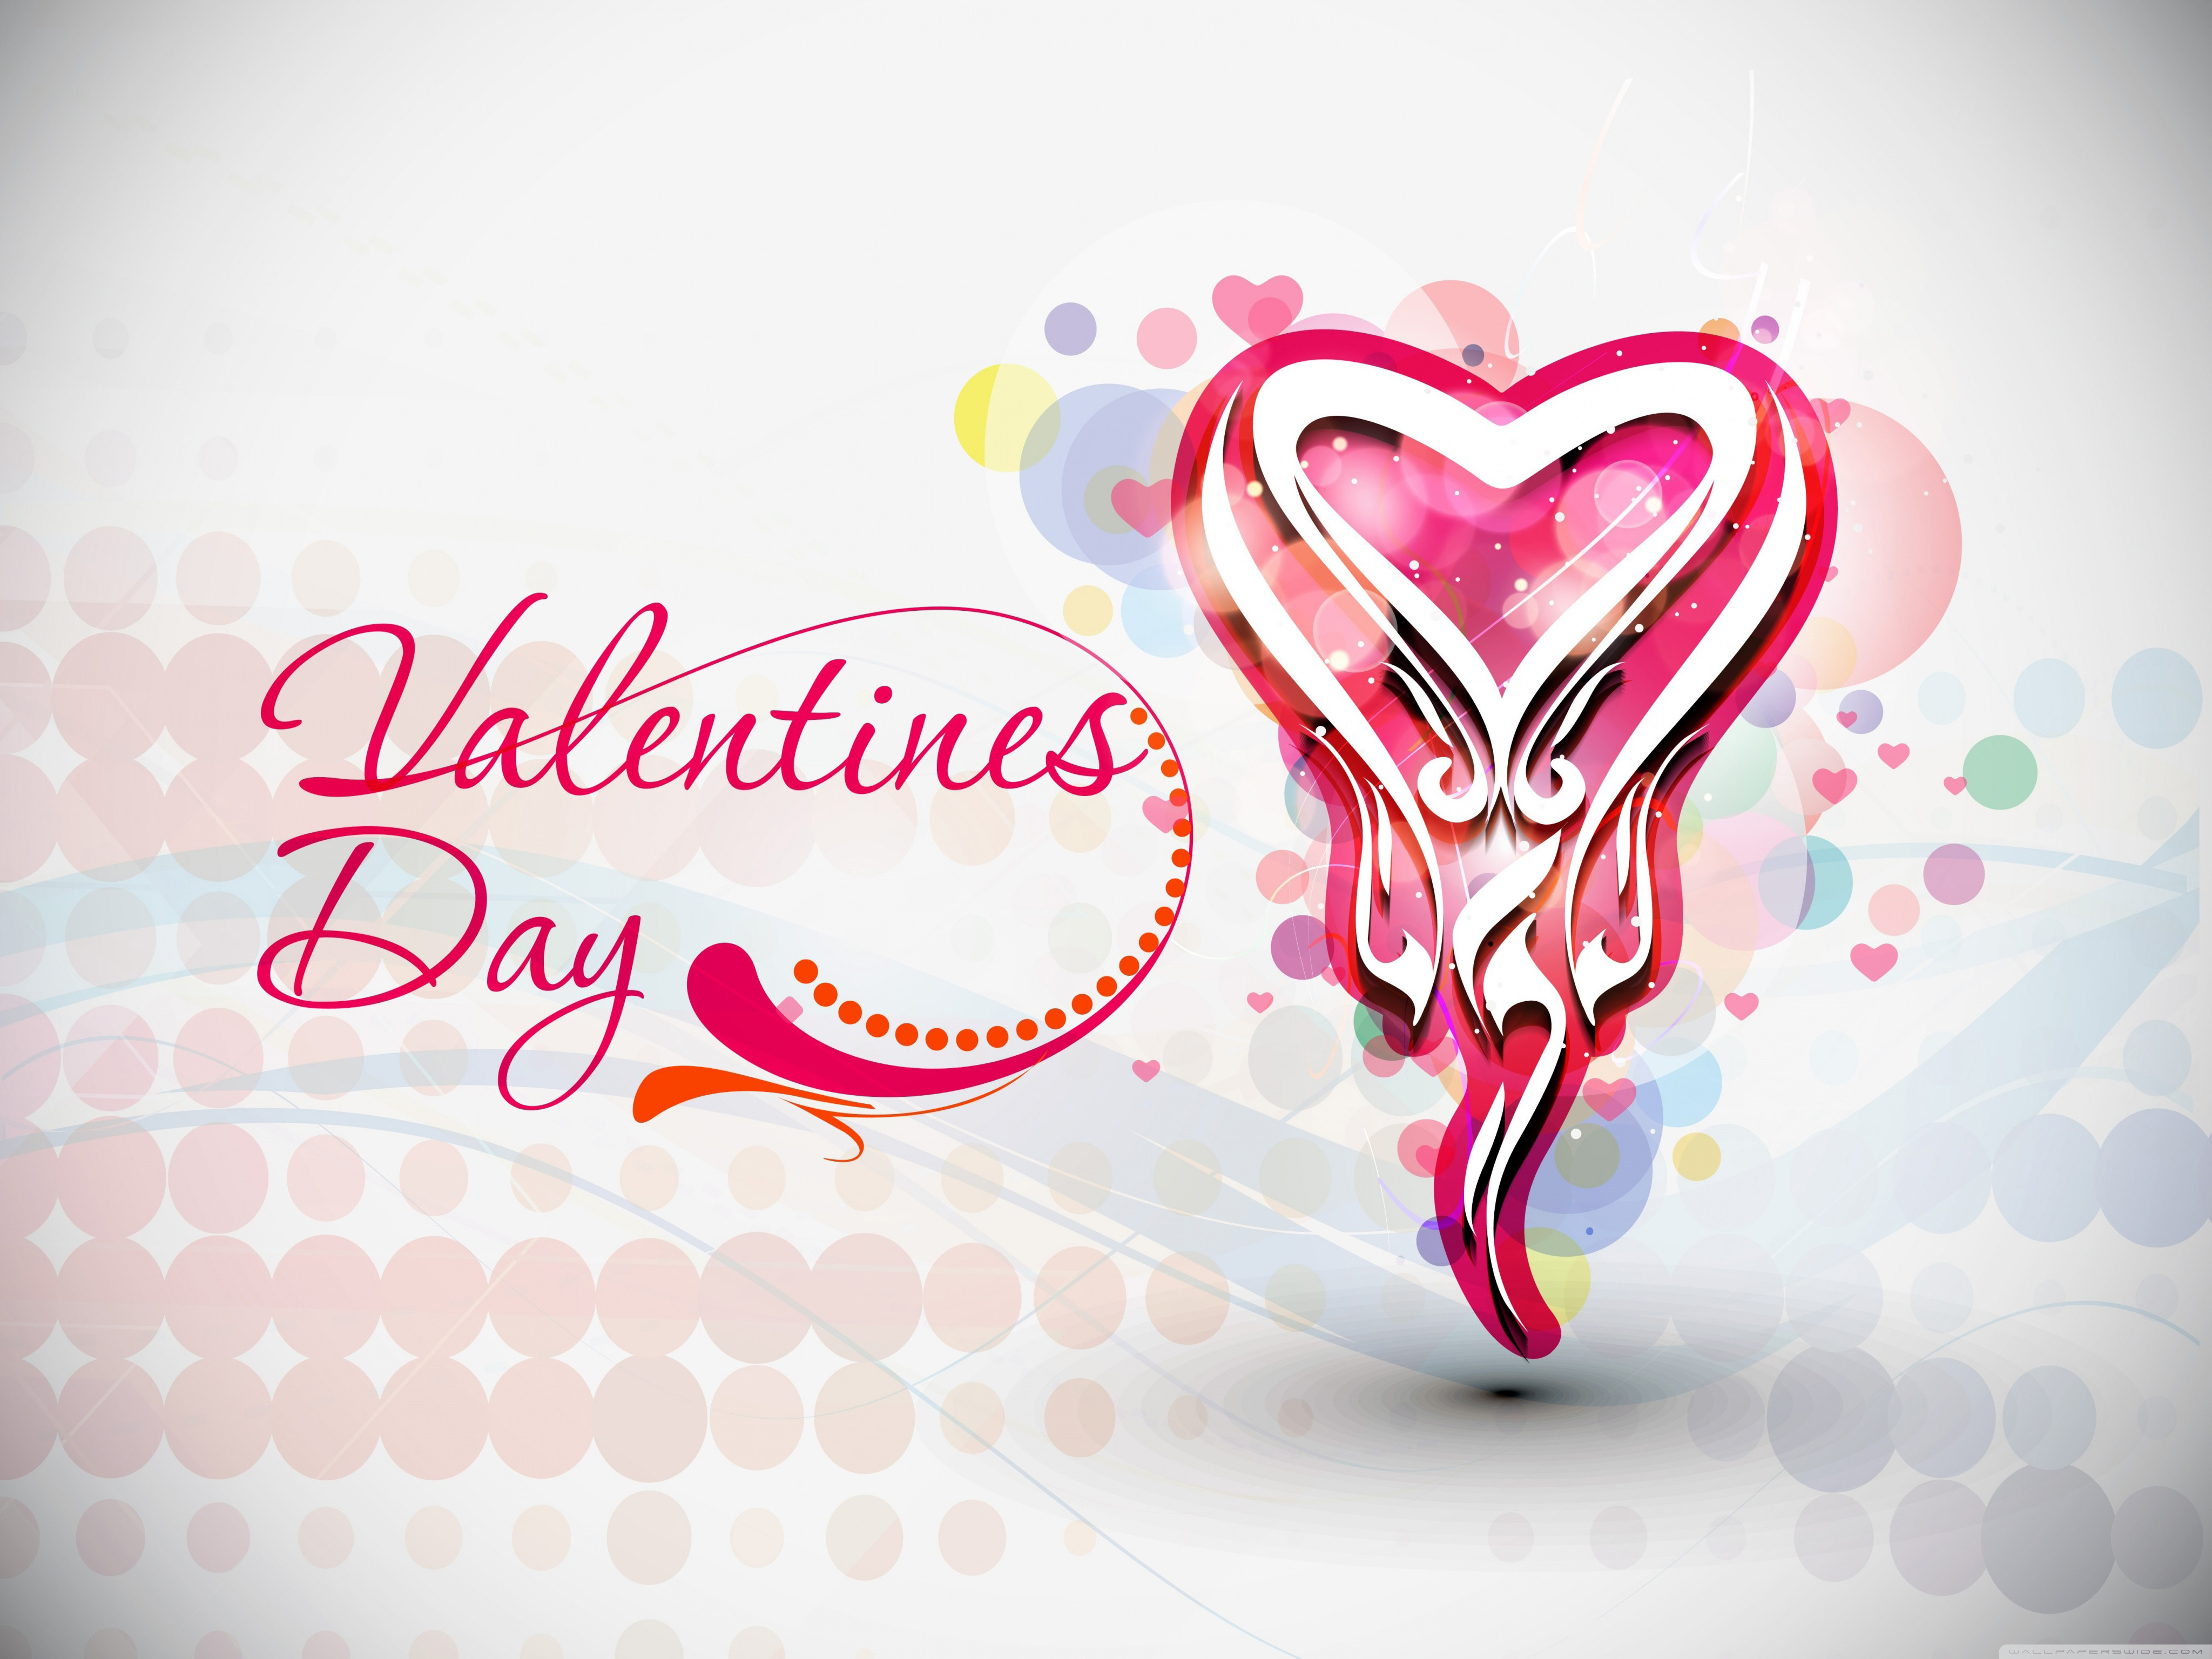 Valentines Day Image Wallpaper Romantic Pictures